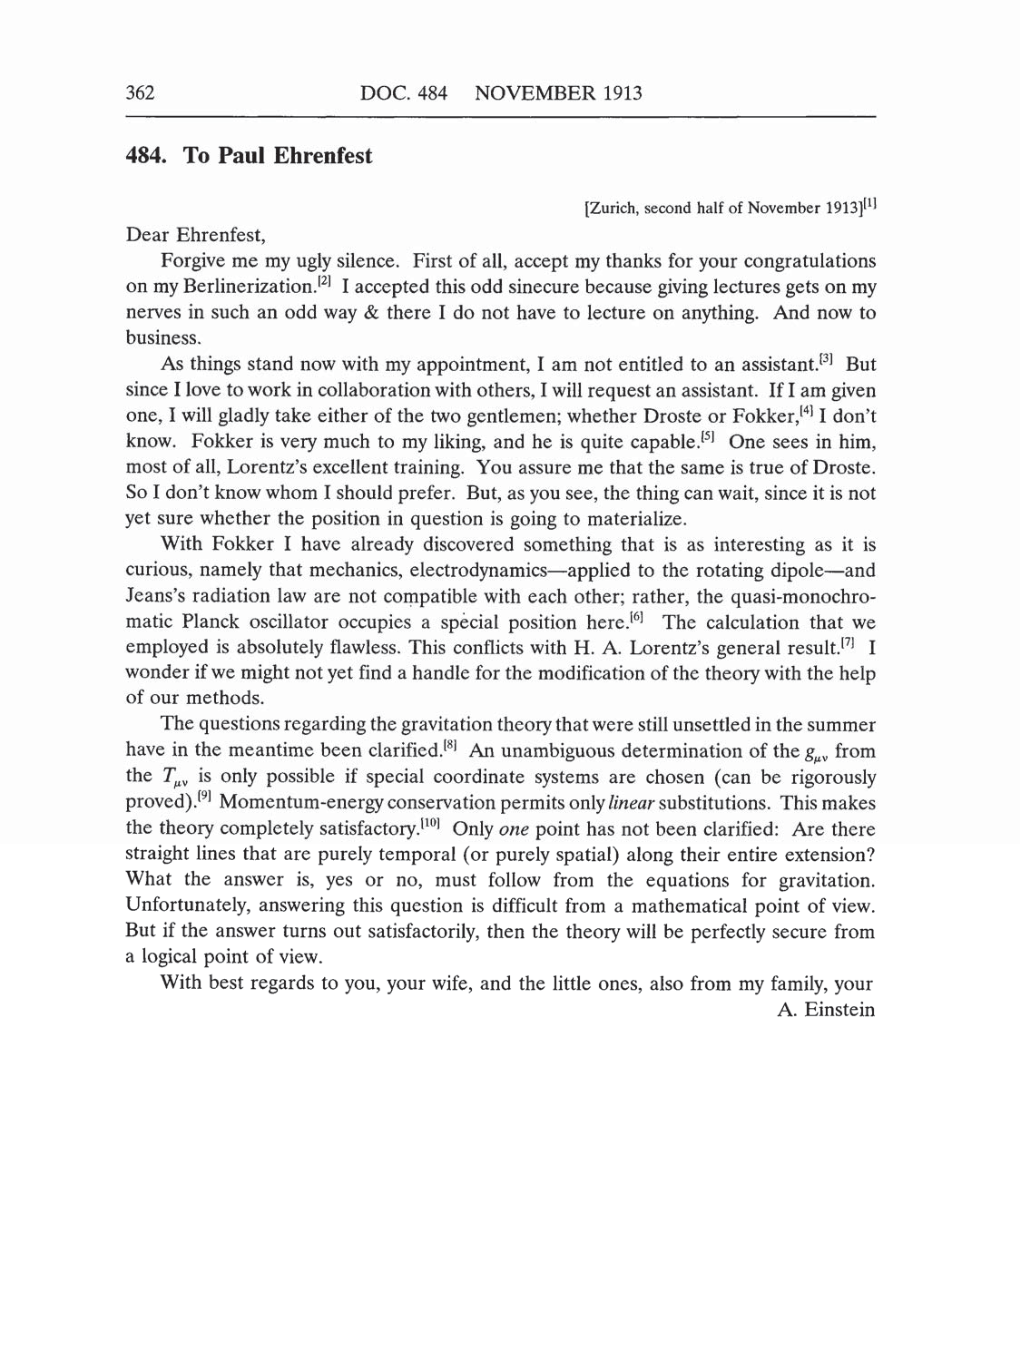 Volume 5: The Swiss Years: Correspondence, 1902-1914 (English translation supplement) page 362